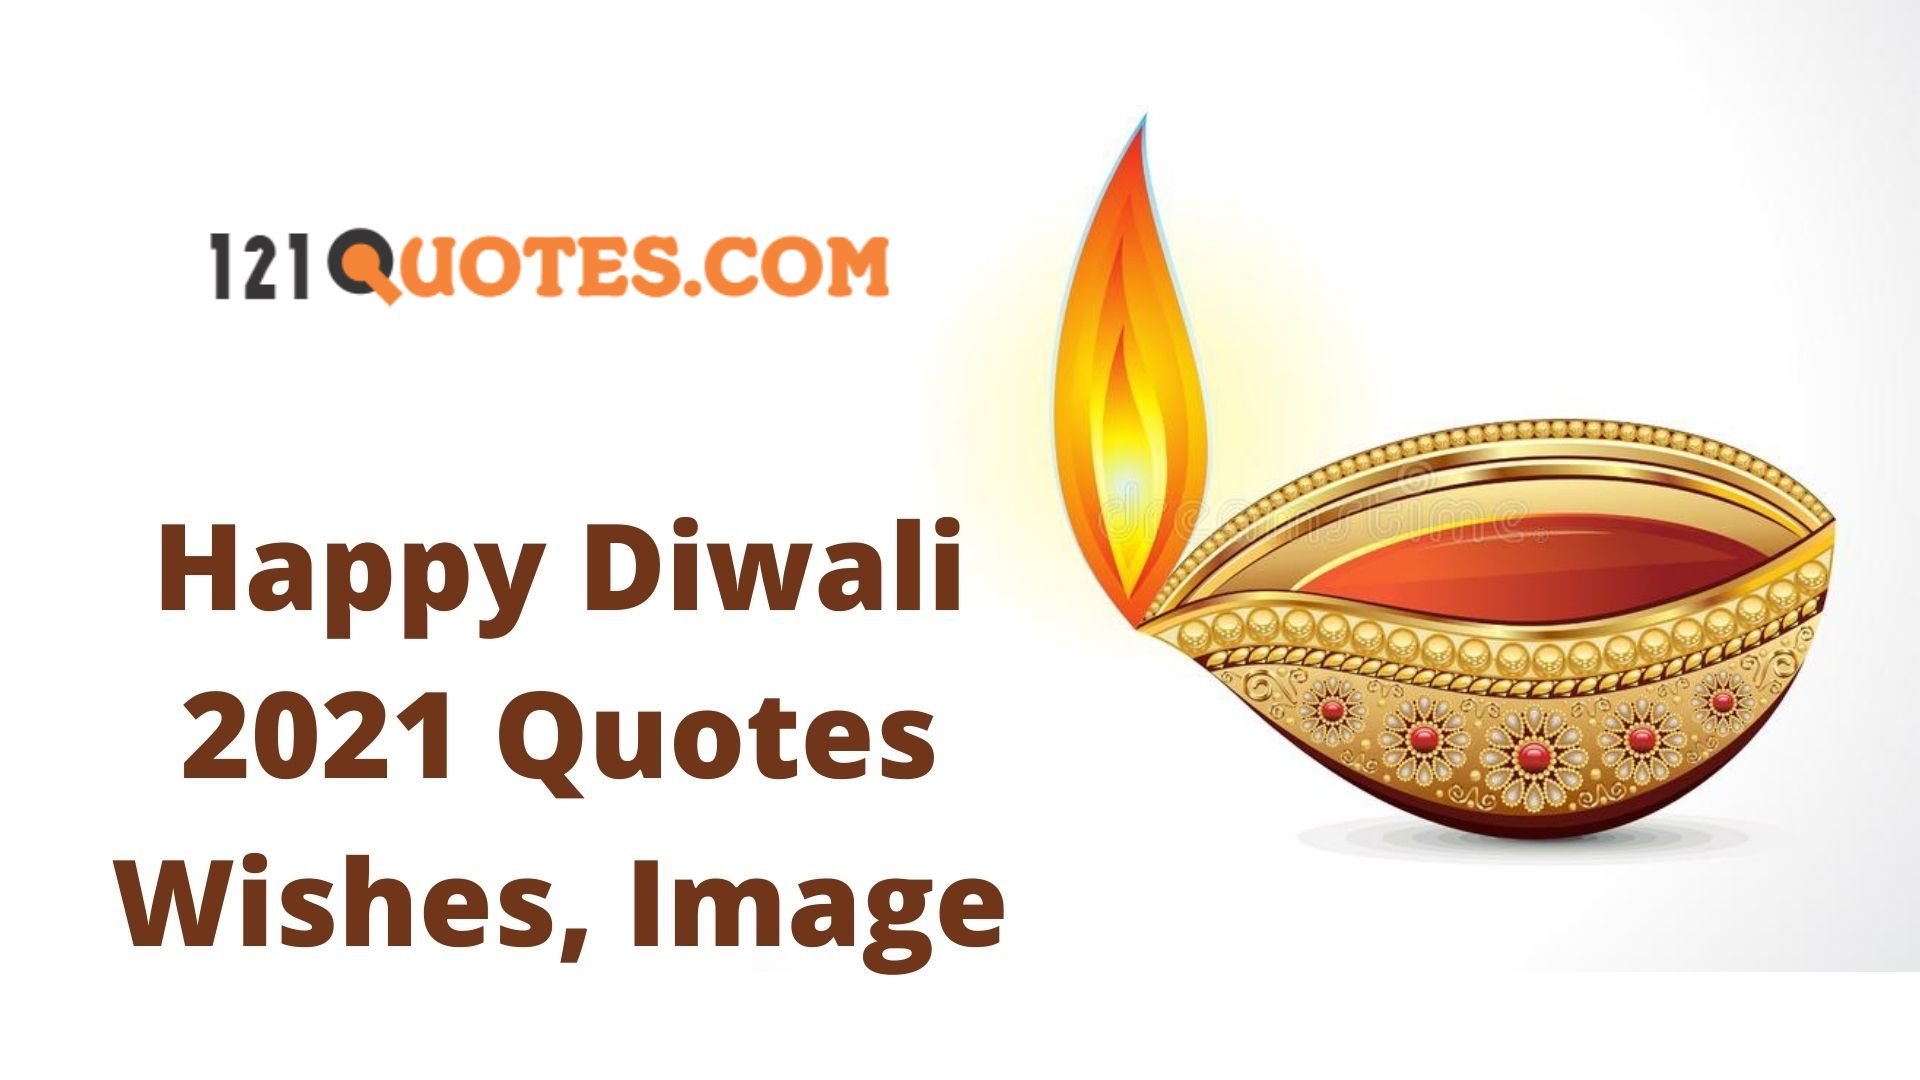 Happy Diwali 2021 Quotes, Wishes, Massage and Status